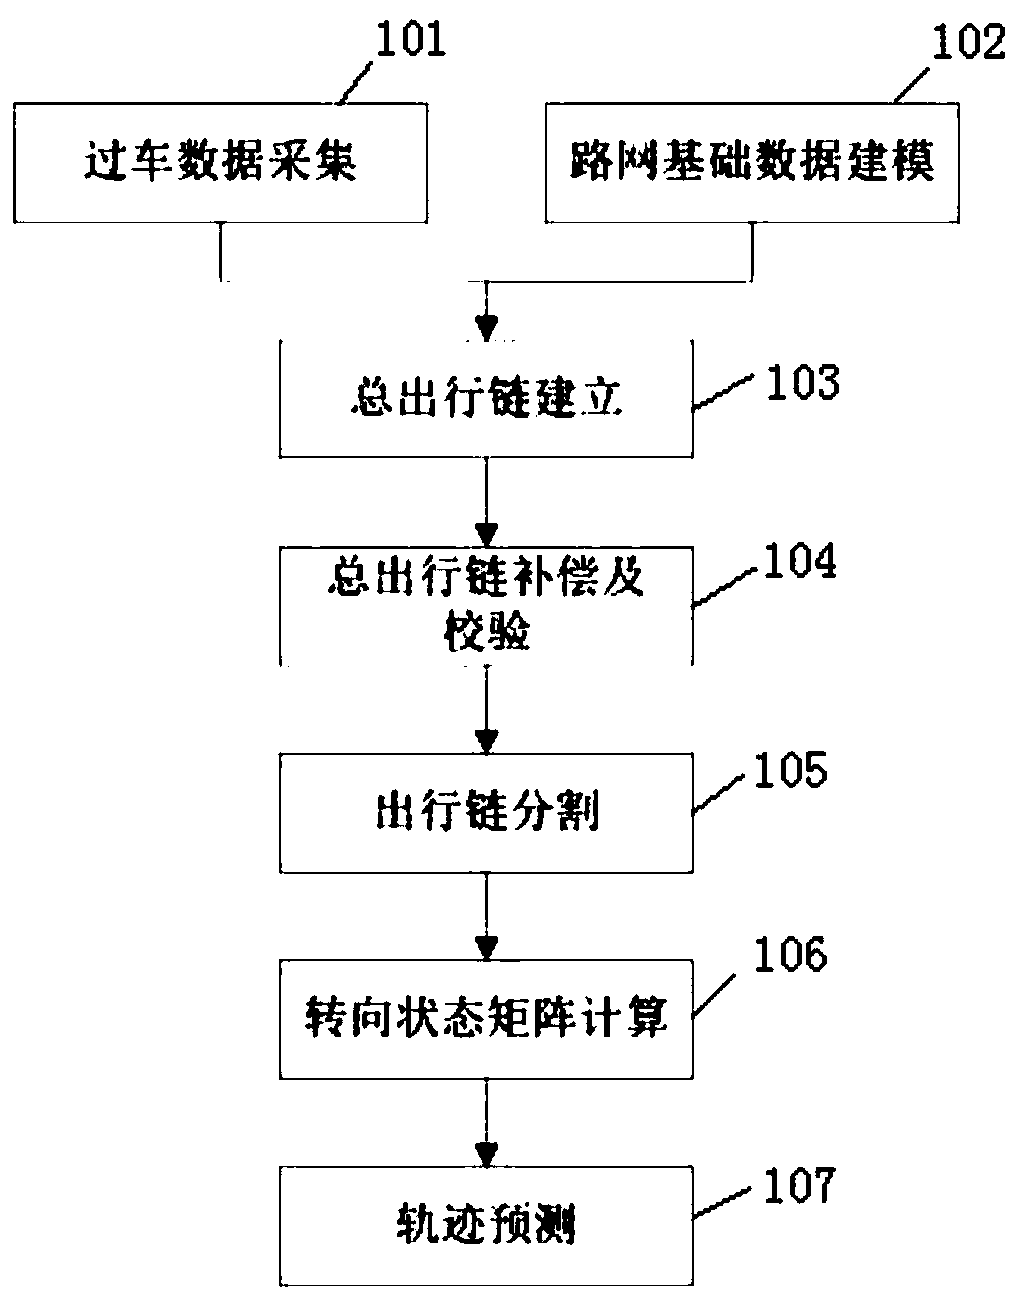 Vehicle trajectory prediction method and system based on video vehicle passing data